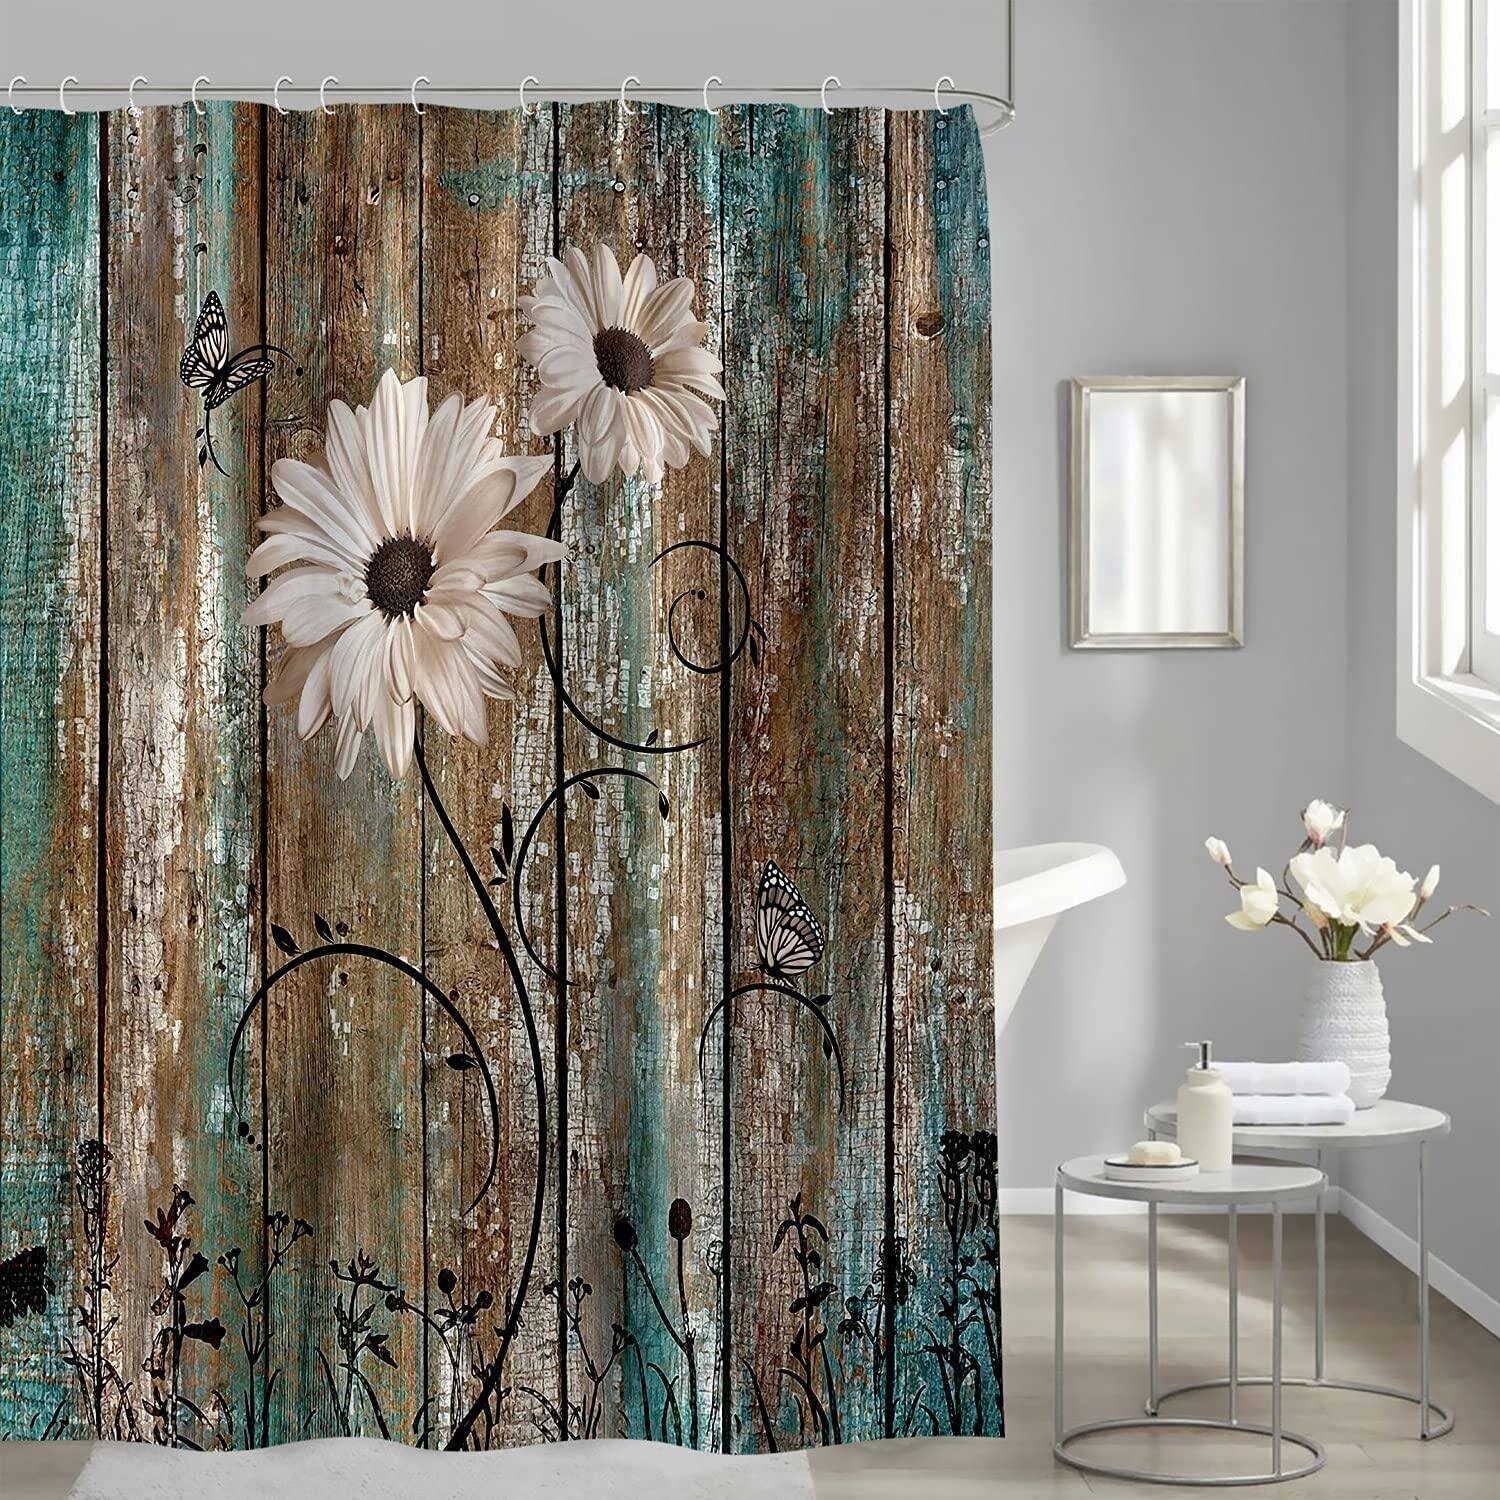 Butterfly and white flowers Shower Curtain Bathroom Fabric & 12hooks 71x71inches 